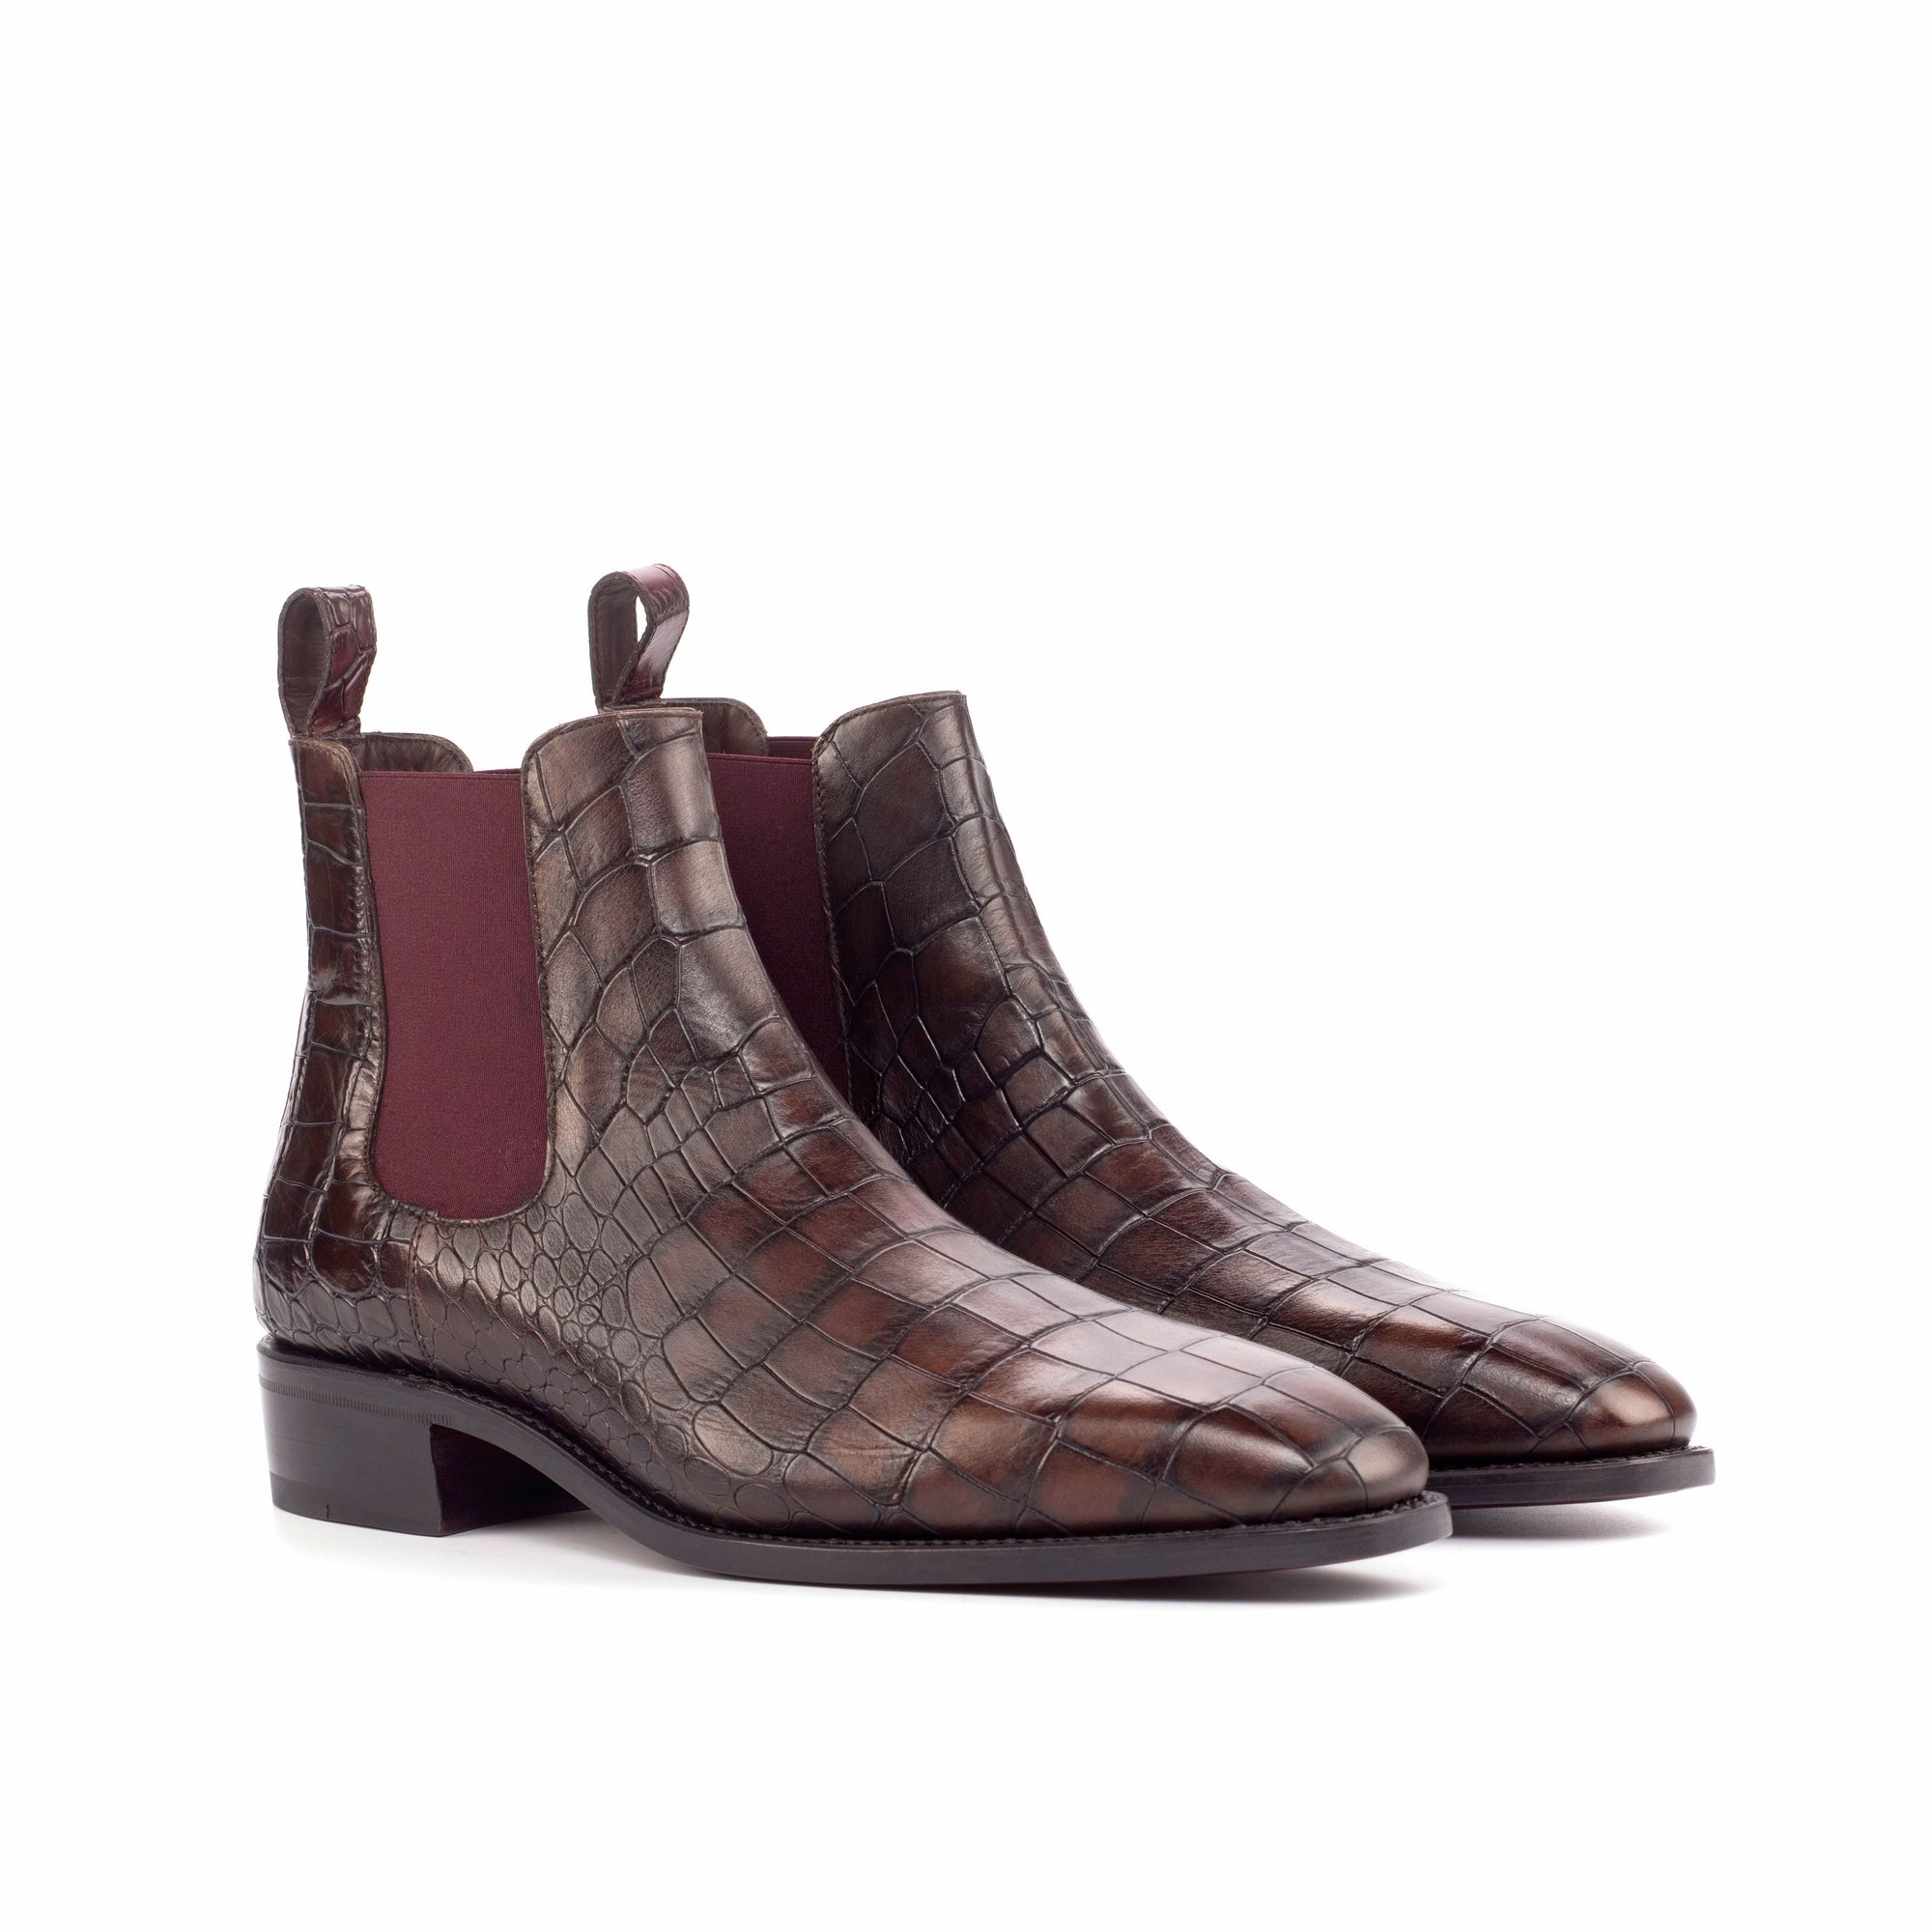 Elevated Chelsea Boots - Dark Brown & Burgundy Croco Leather with Cuban Heel